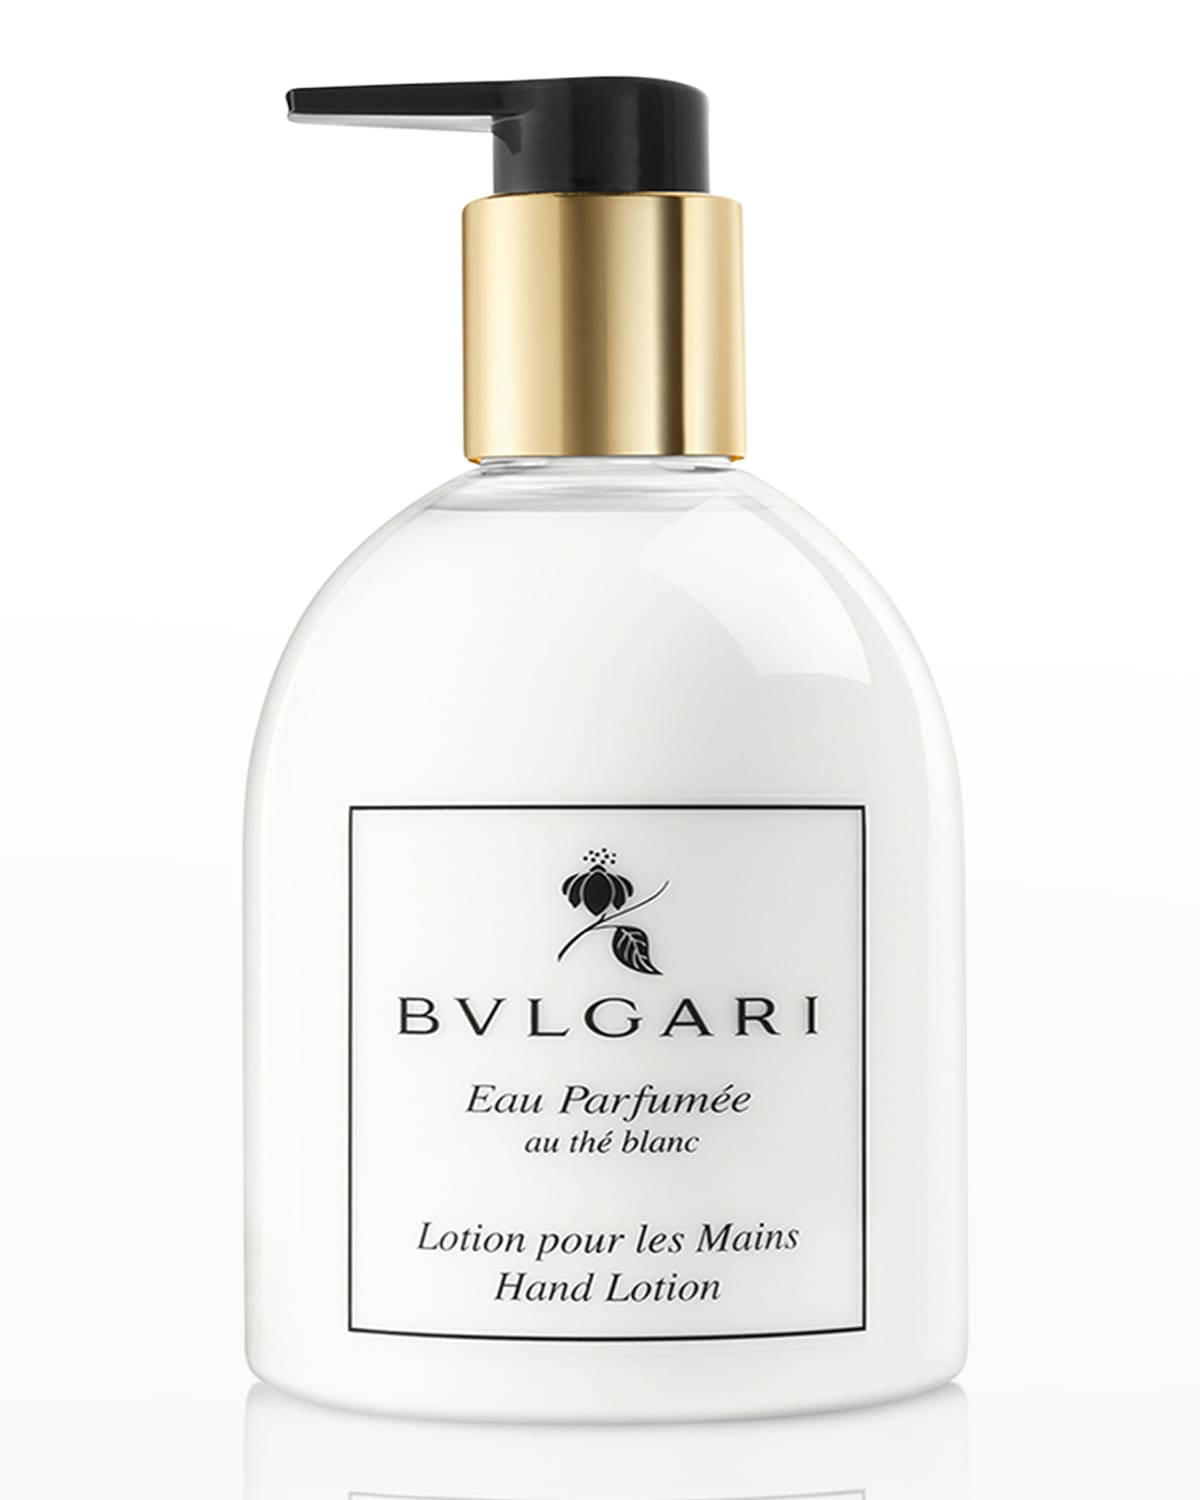 Eau Parfumee Au The Blanc Hand & Body Lotion, Yours with any $200 BVLGARI Purchase